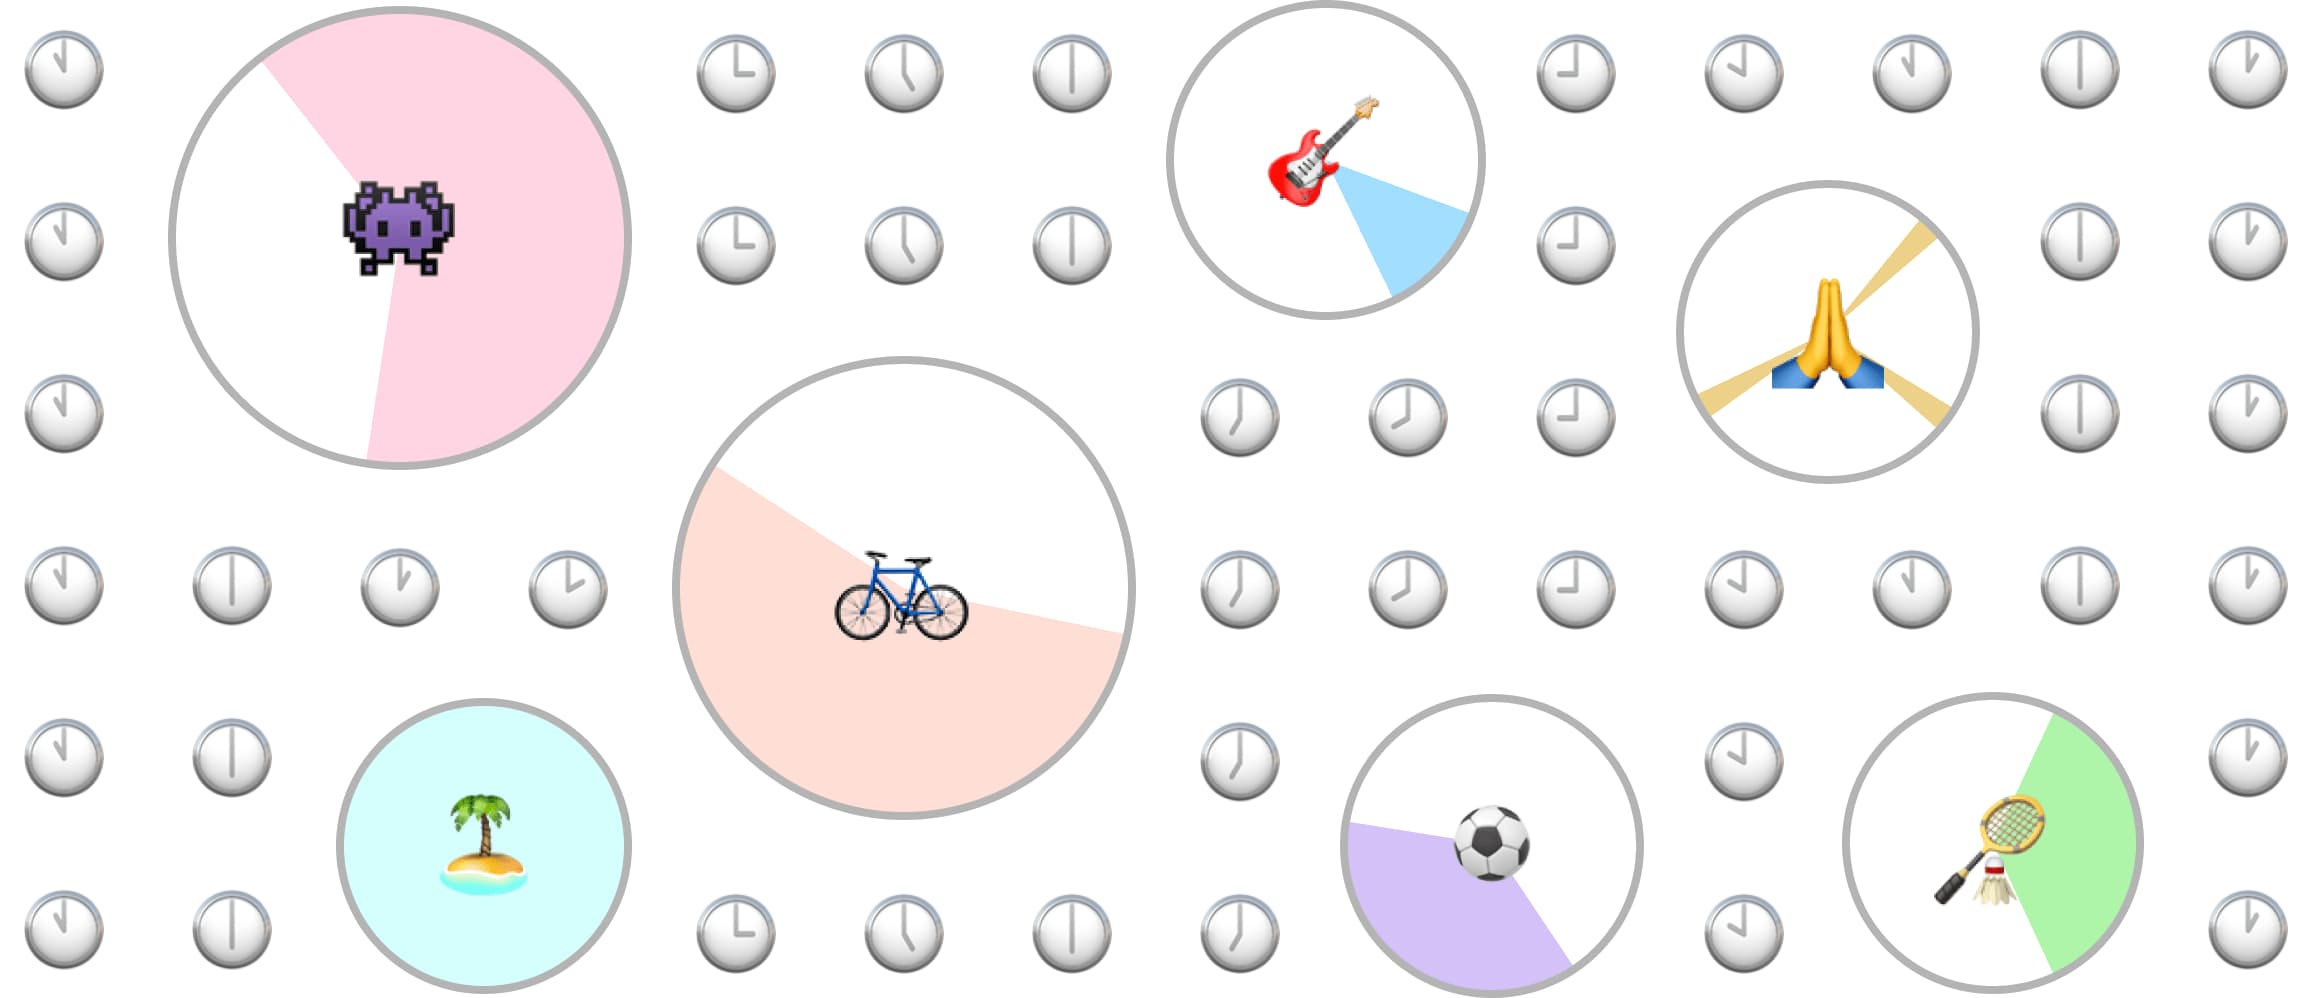 A background of clocks with various emojis representing time spent doing activities